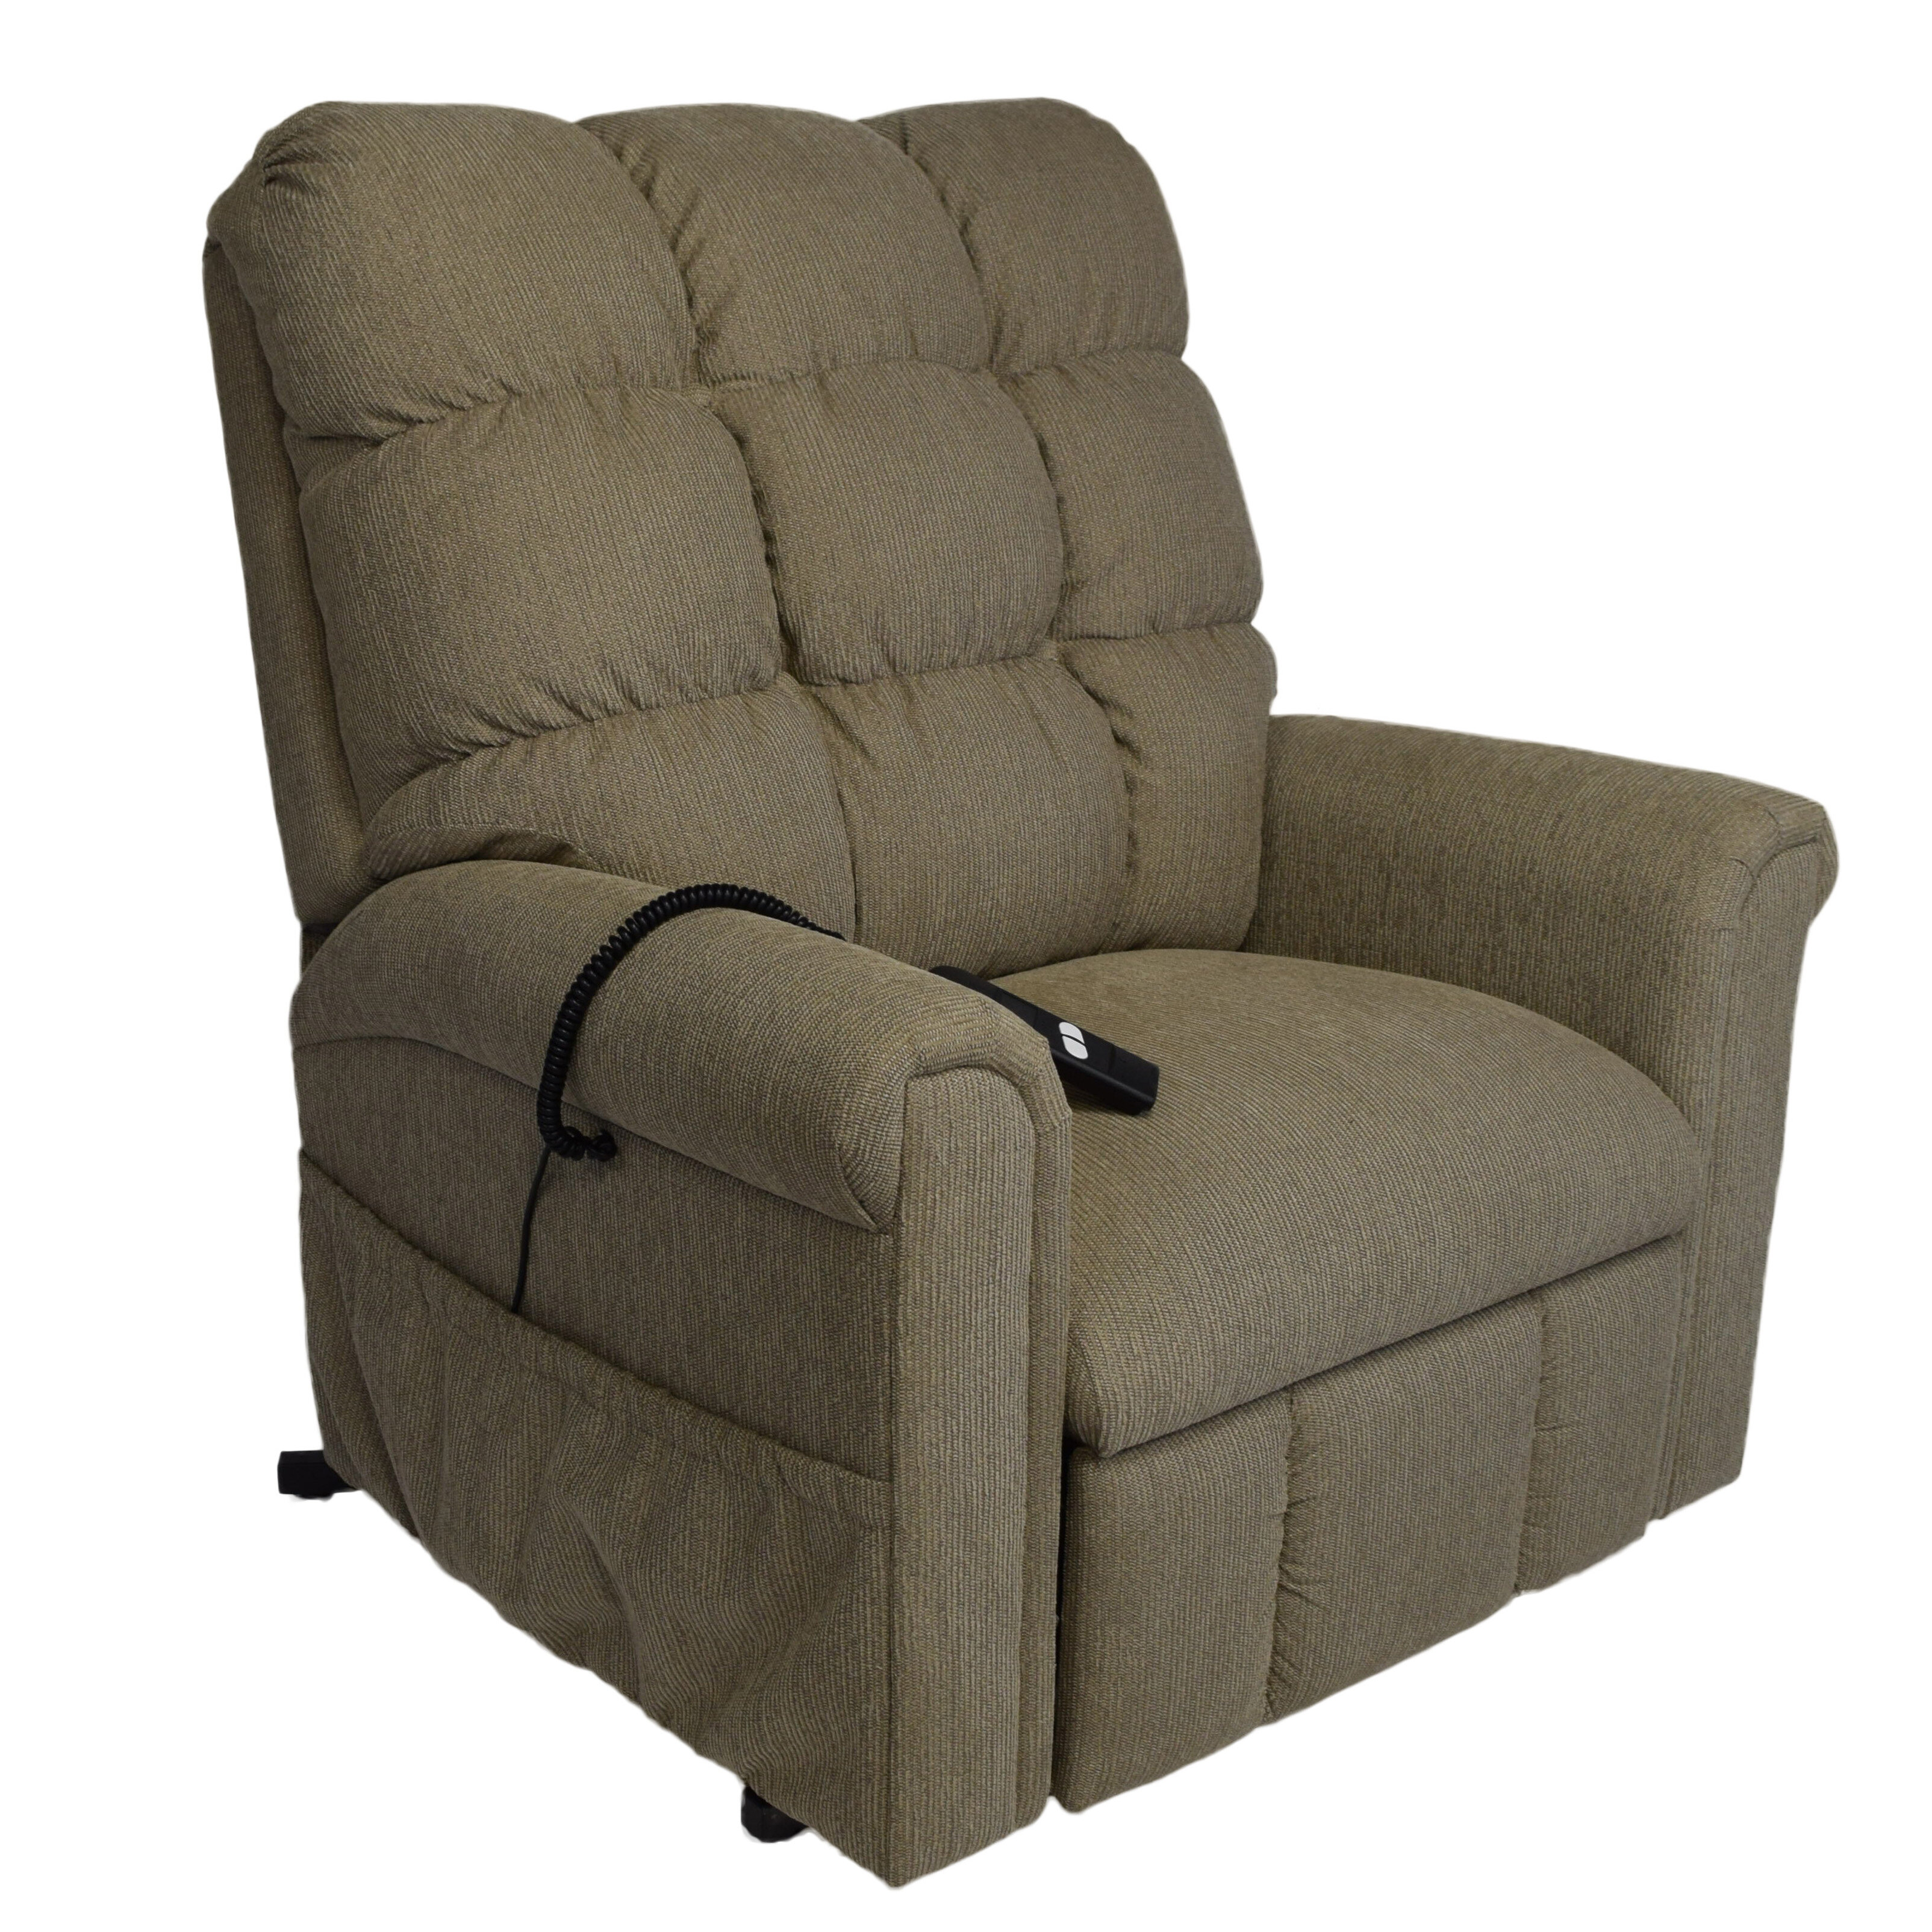 Comfort Chair Company American Series Extra Wide Power Lift Assist